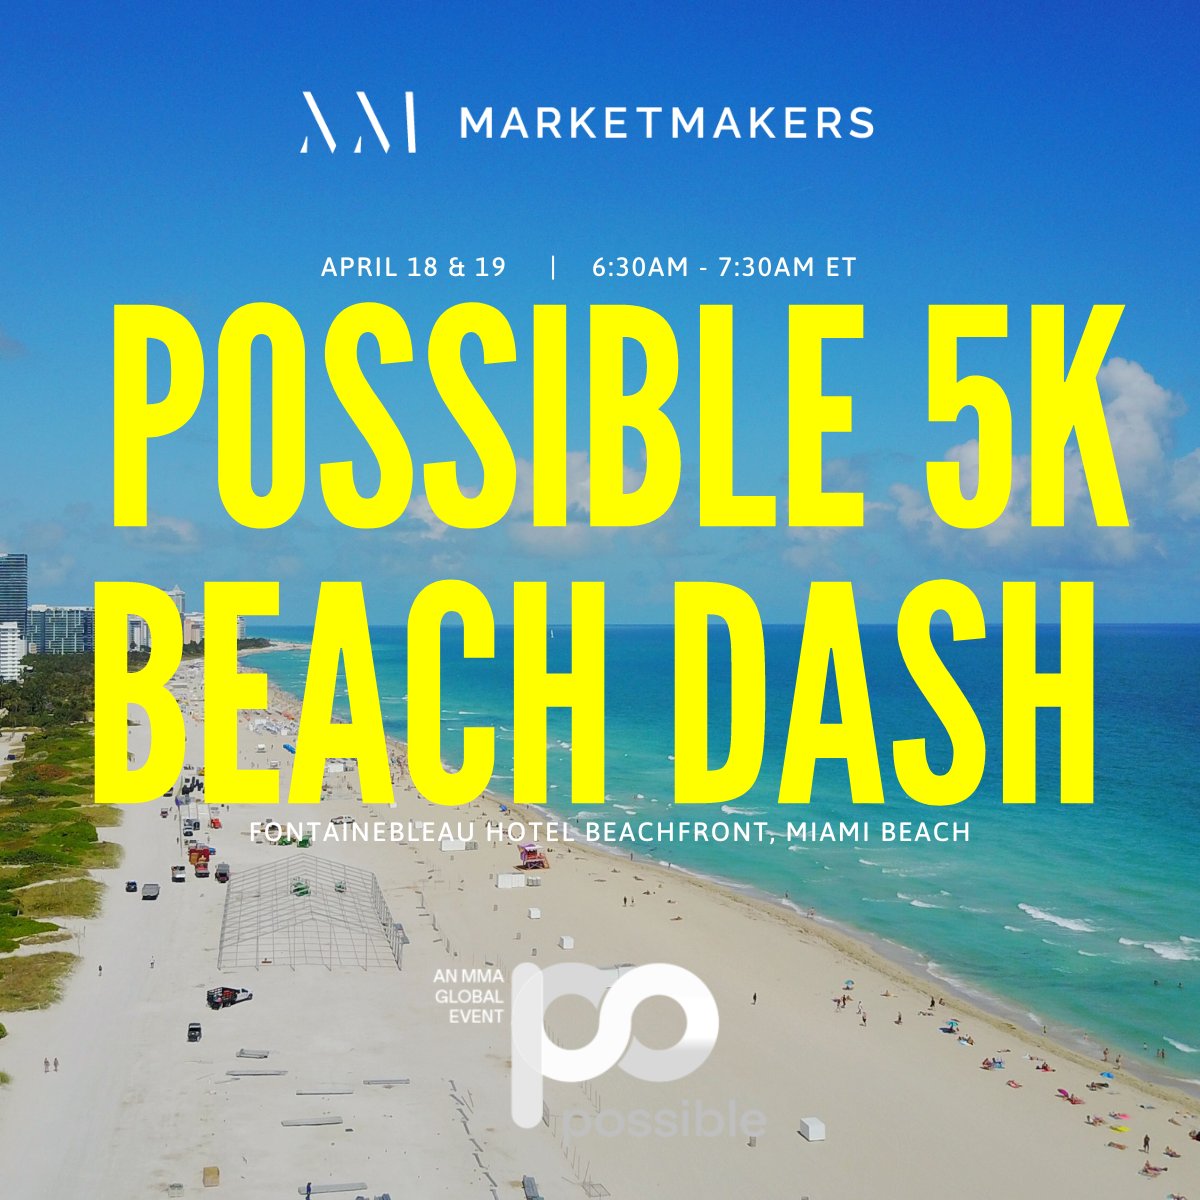 ☀️ All POSSIBLE pass holders are invited to join the MarketMakers wellness events:  🏃‍♀️ 5K Beach Dash & 🧘‍♀️ Active Yoga. 

➡️ RSVP now: possibleevent.com/rsvp-for-morni…    

#possibleevent #marketmakers #wellness #5k #yogaonthebeach #marketingevent #marketingconference #marketing